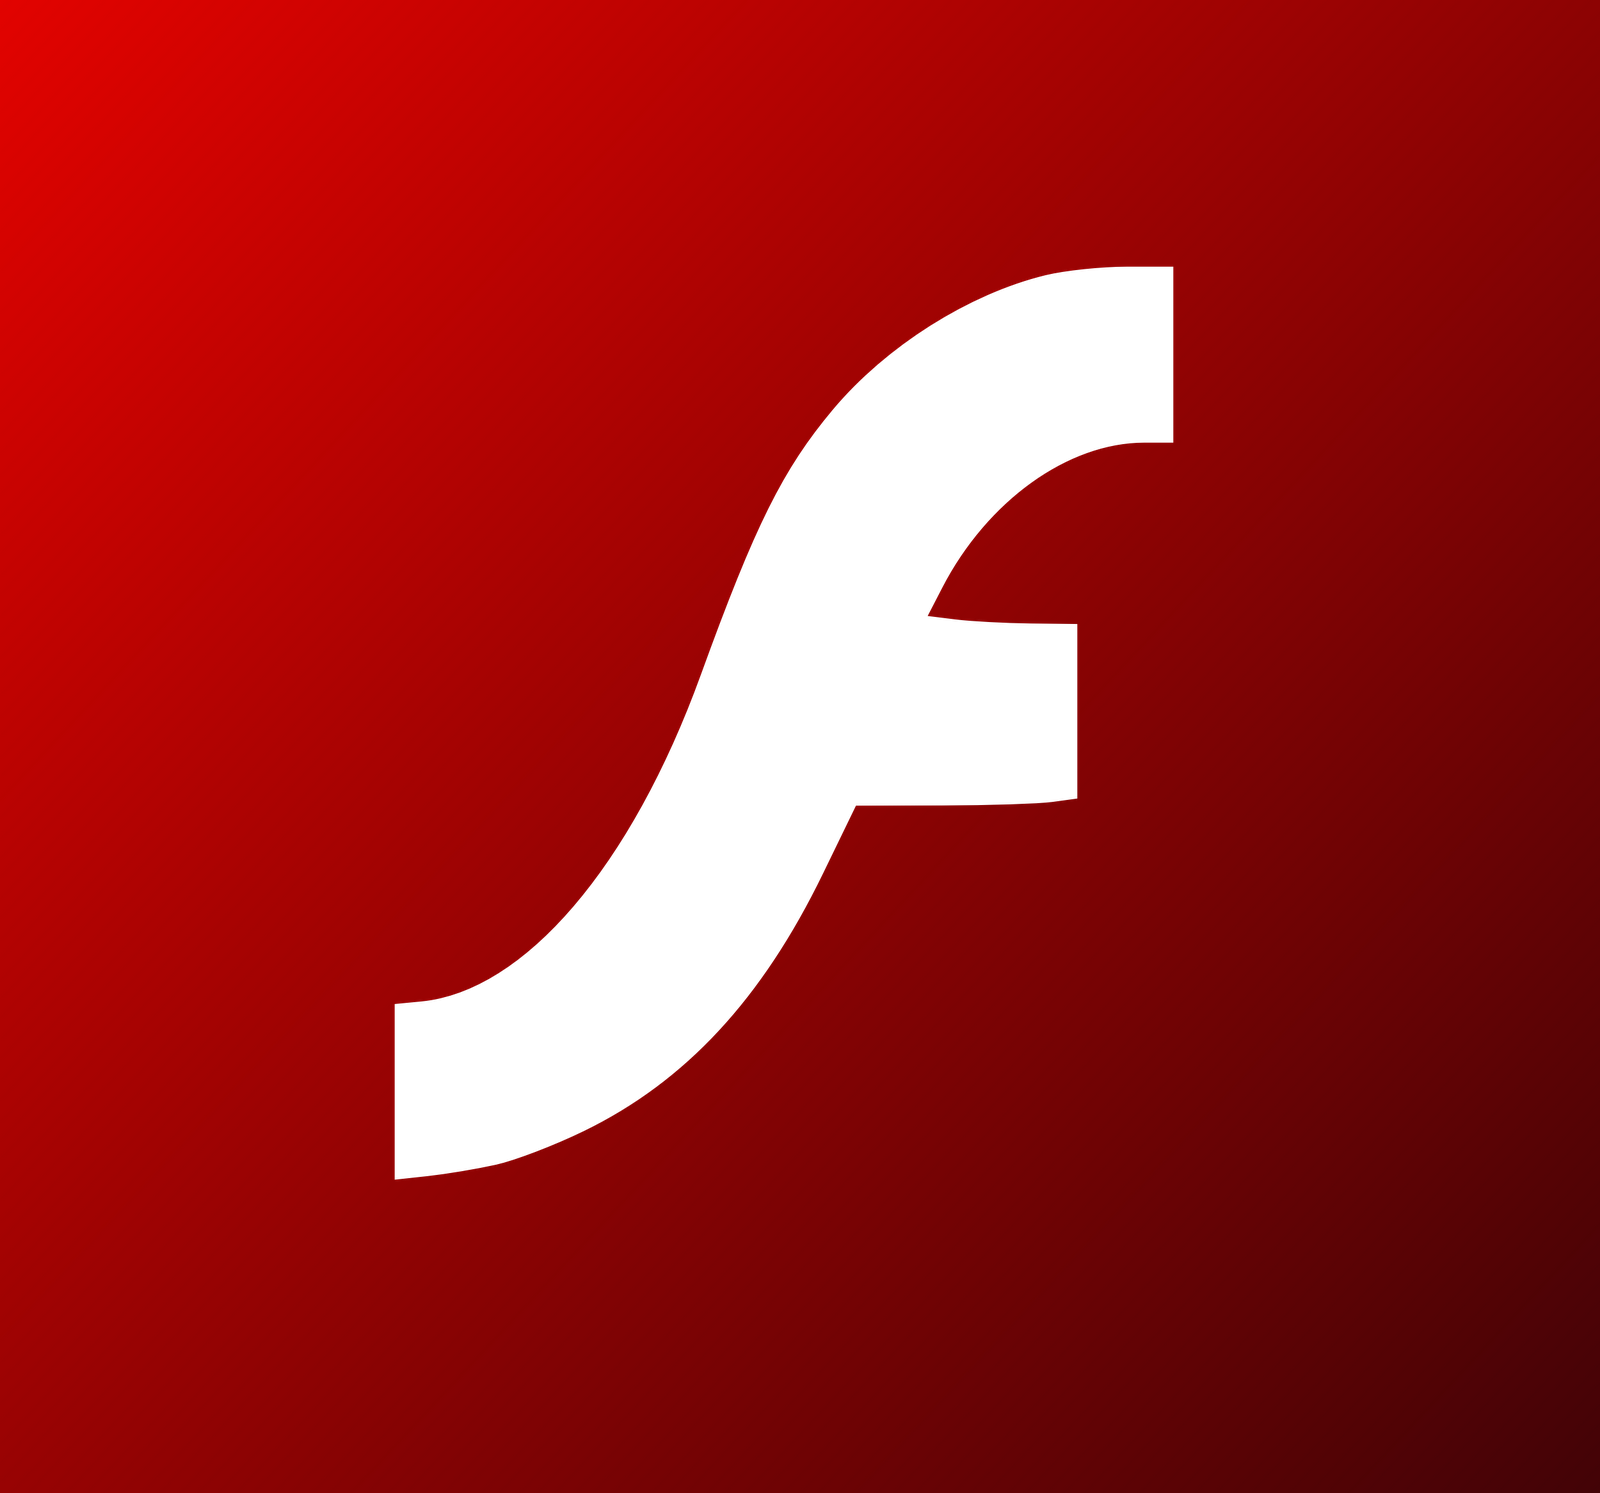 adobe flash player 11 free download for windows xp filehippo